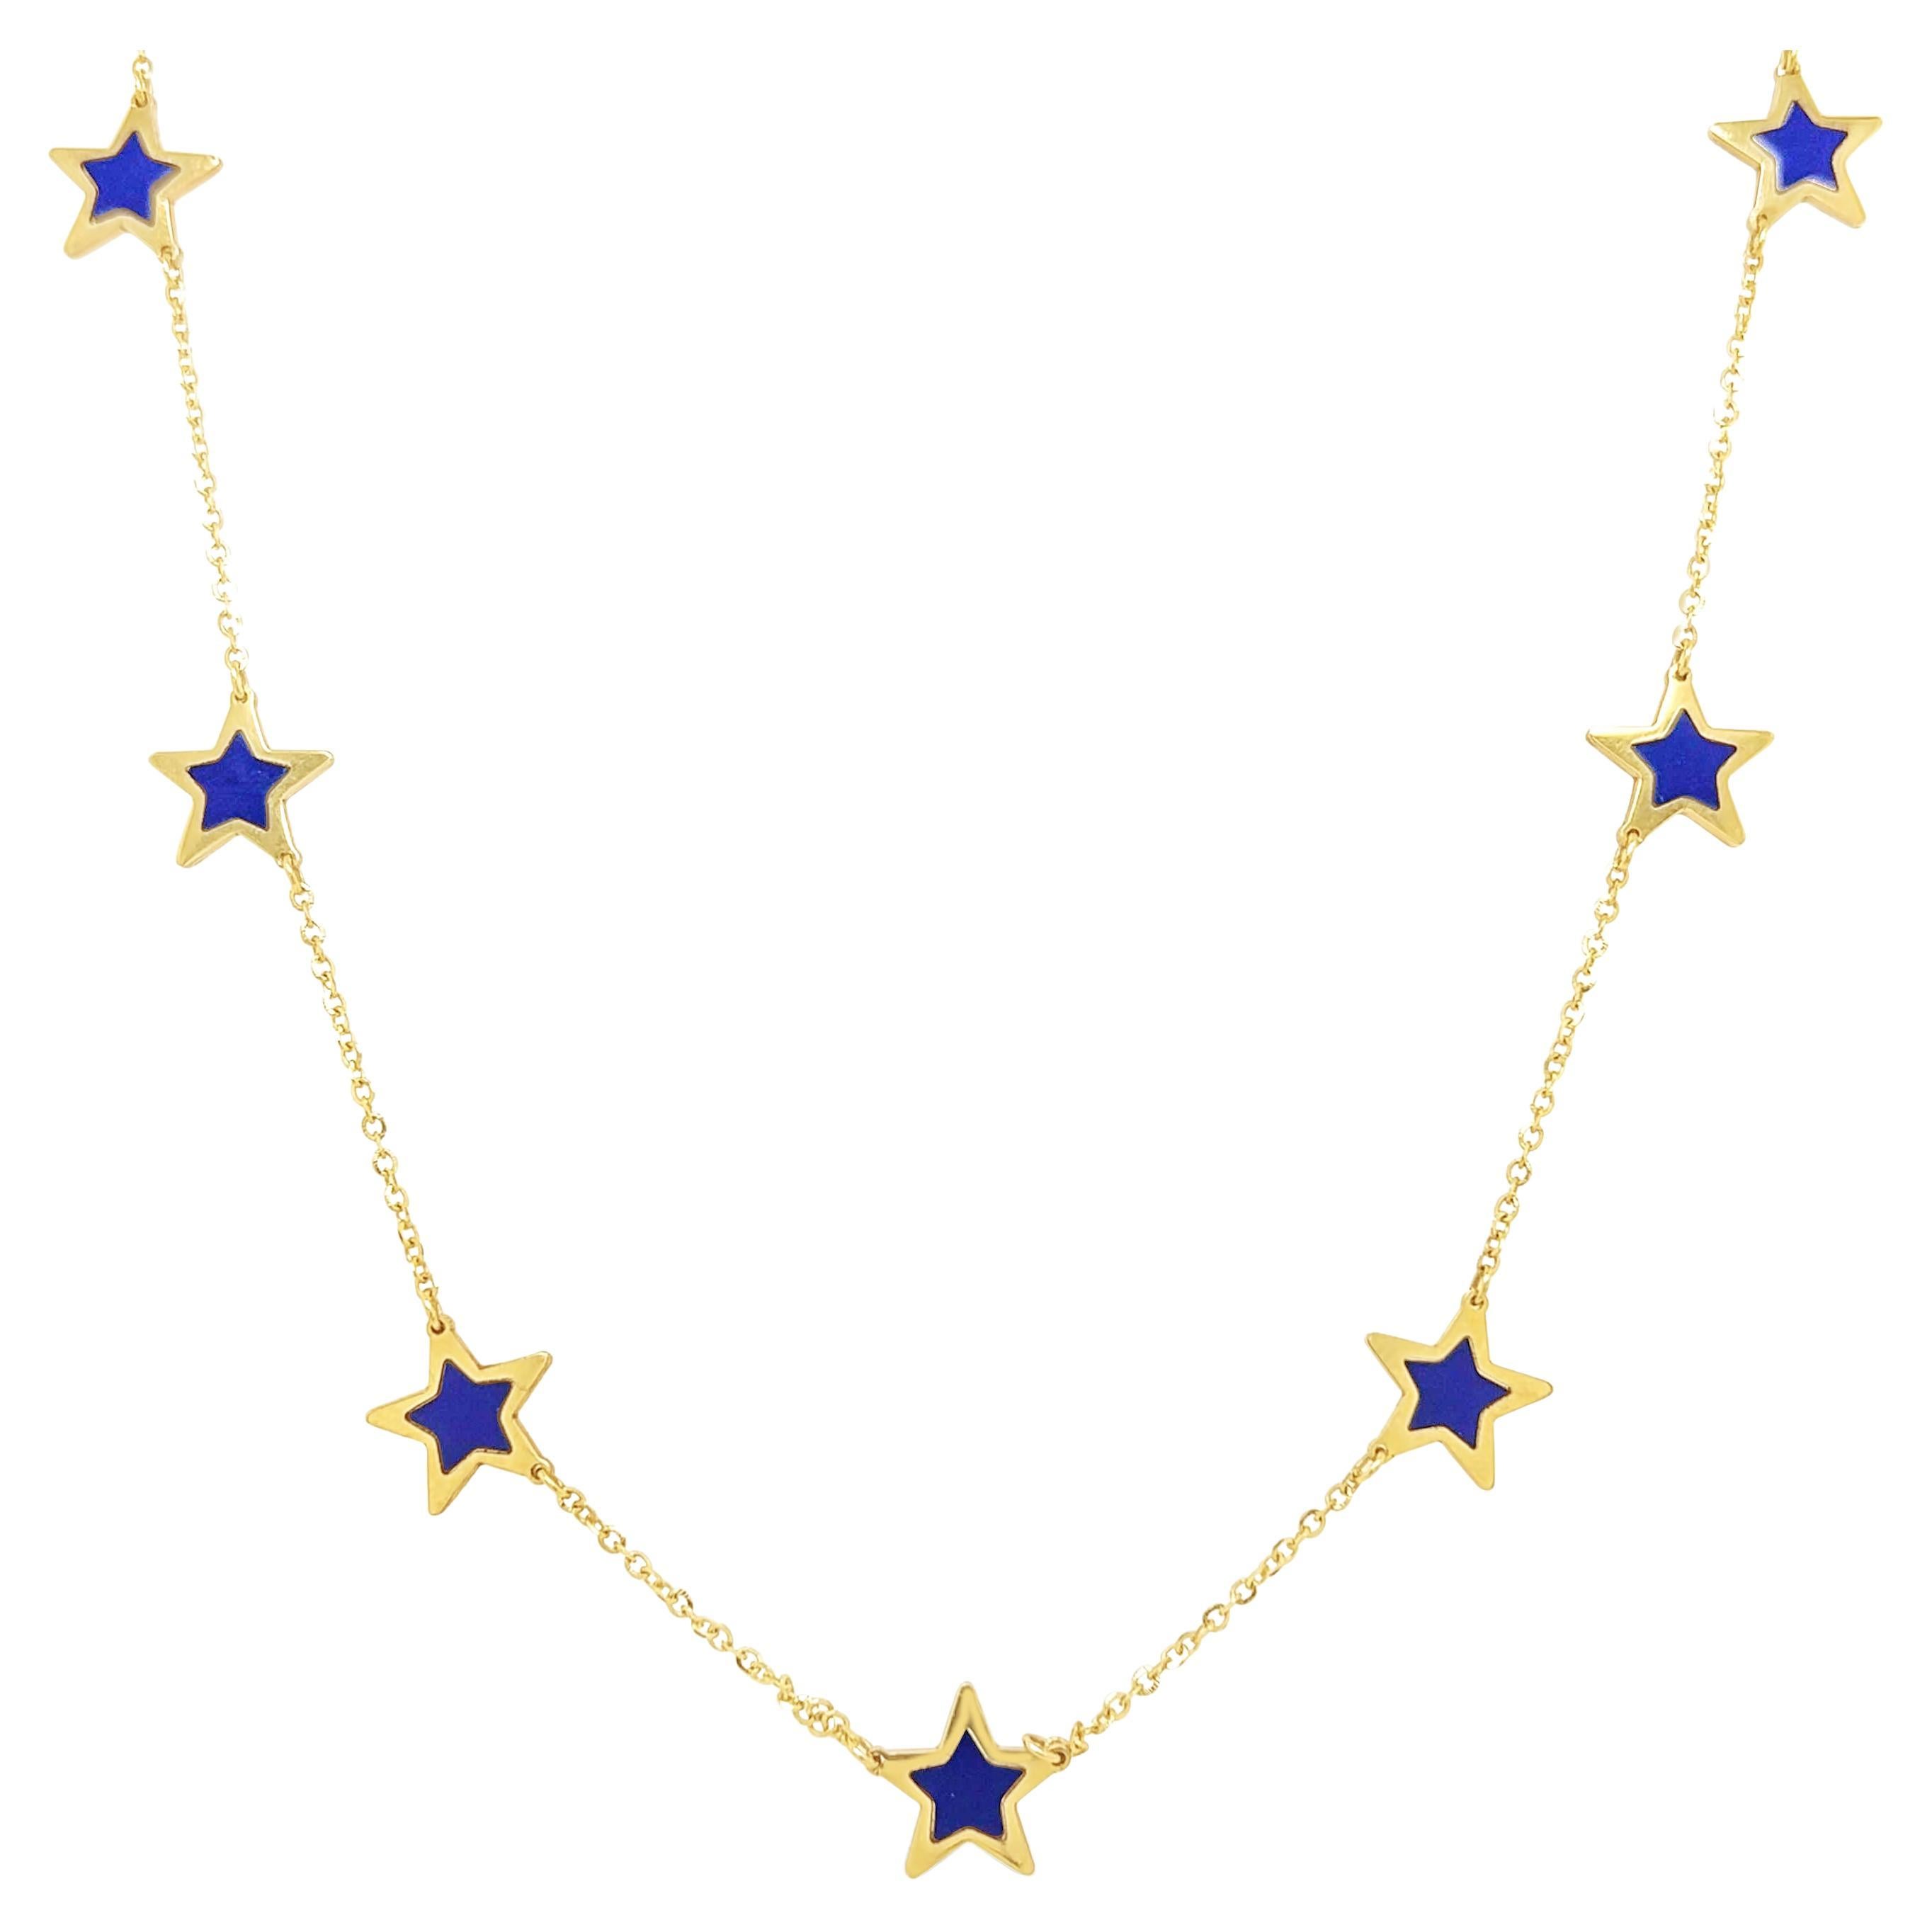 Many of our items include UK VAT at 20%. This means we may be able to remove this when you are purchasing from outside of the UK. Please message us if you would like to know about a specific item.
Material: 14ct Yellow Gold
Gemstone: Lapis